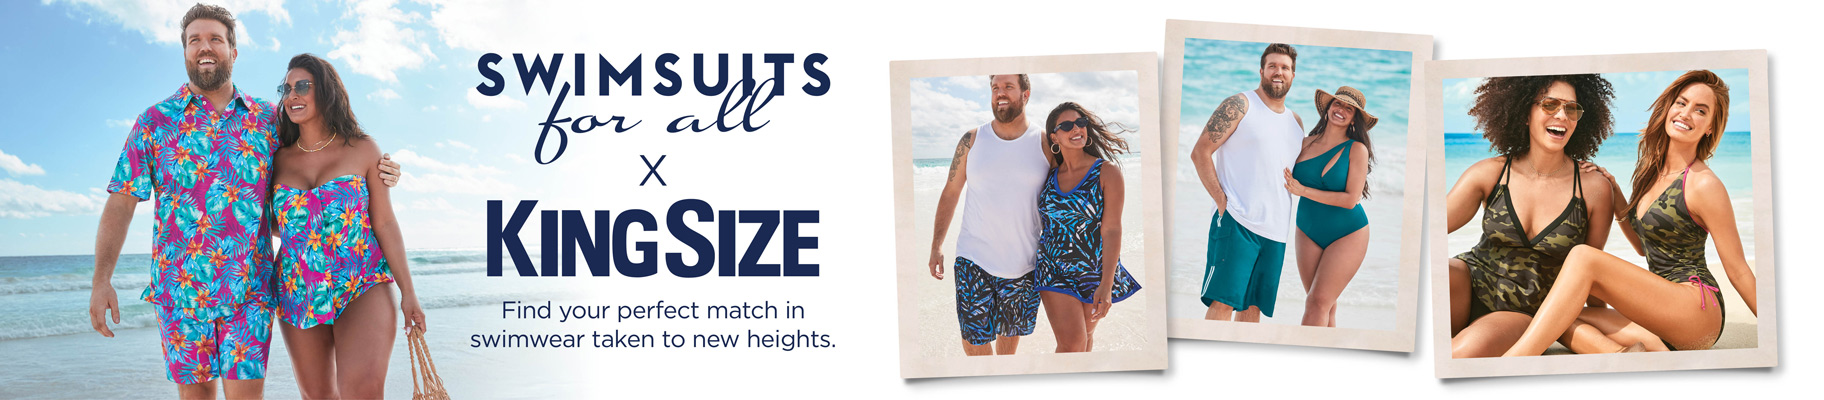 KINGSIZE & Swimsuits For All. A match made in Paradise.